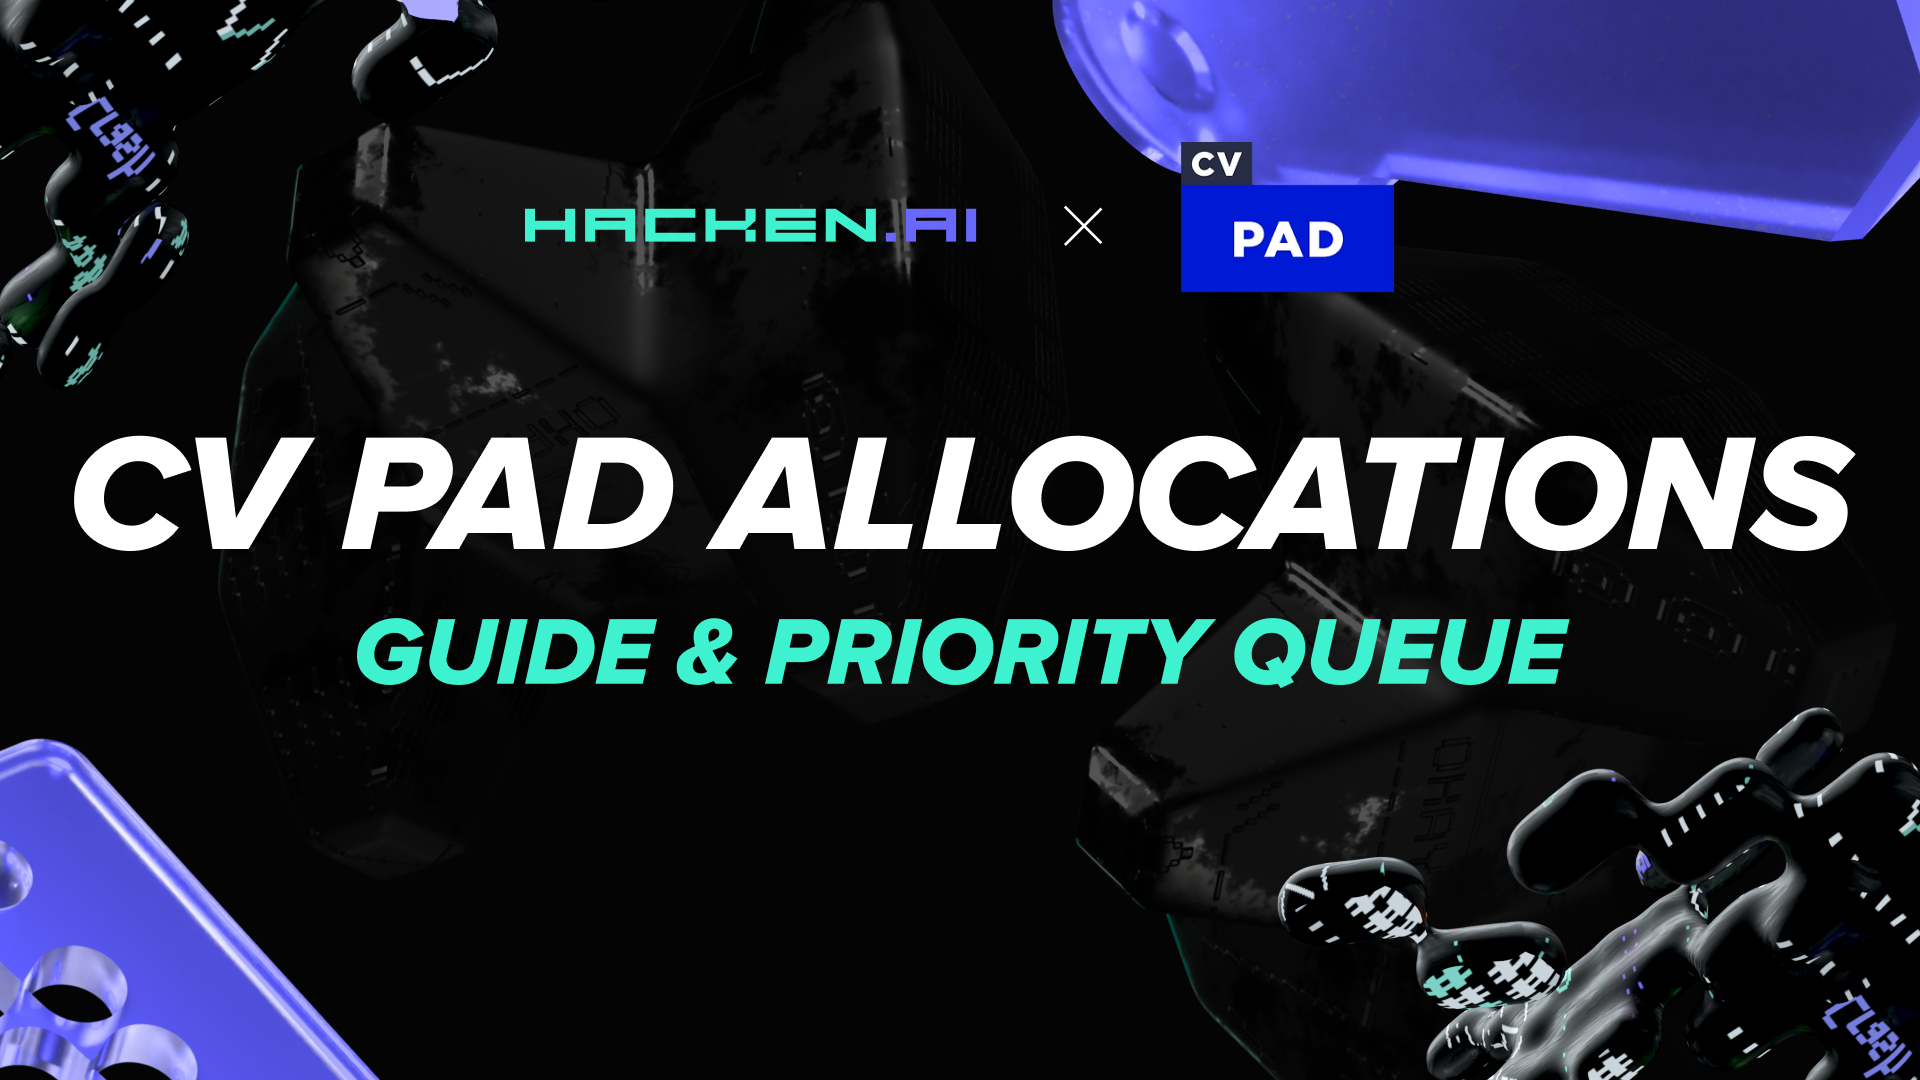 Early Reservation for CV Pad Allocations: A Golden Opportunity for the Hacken Community Available